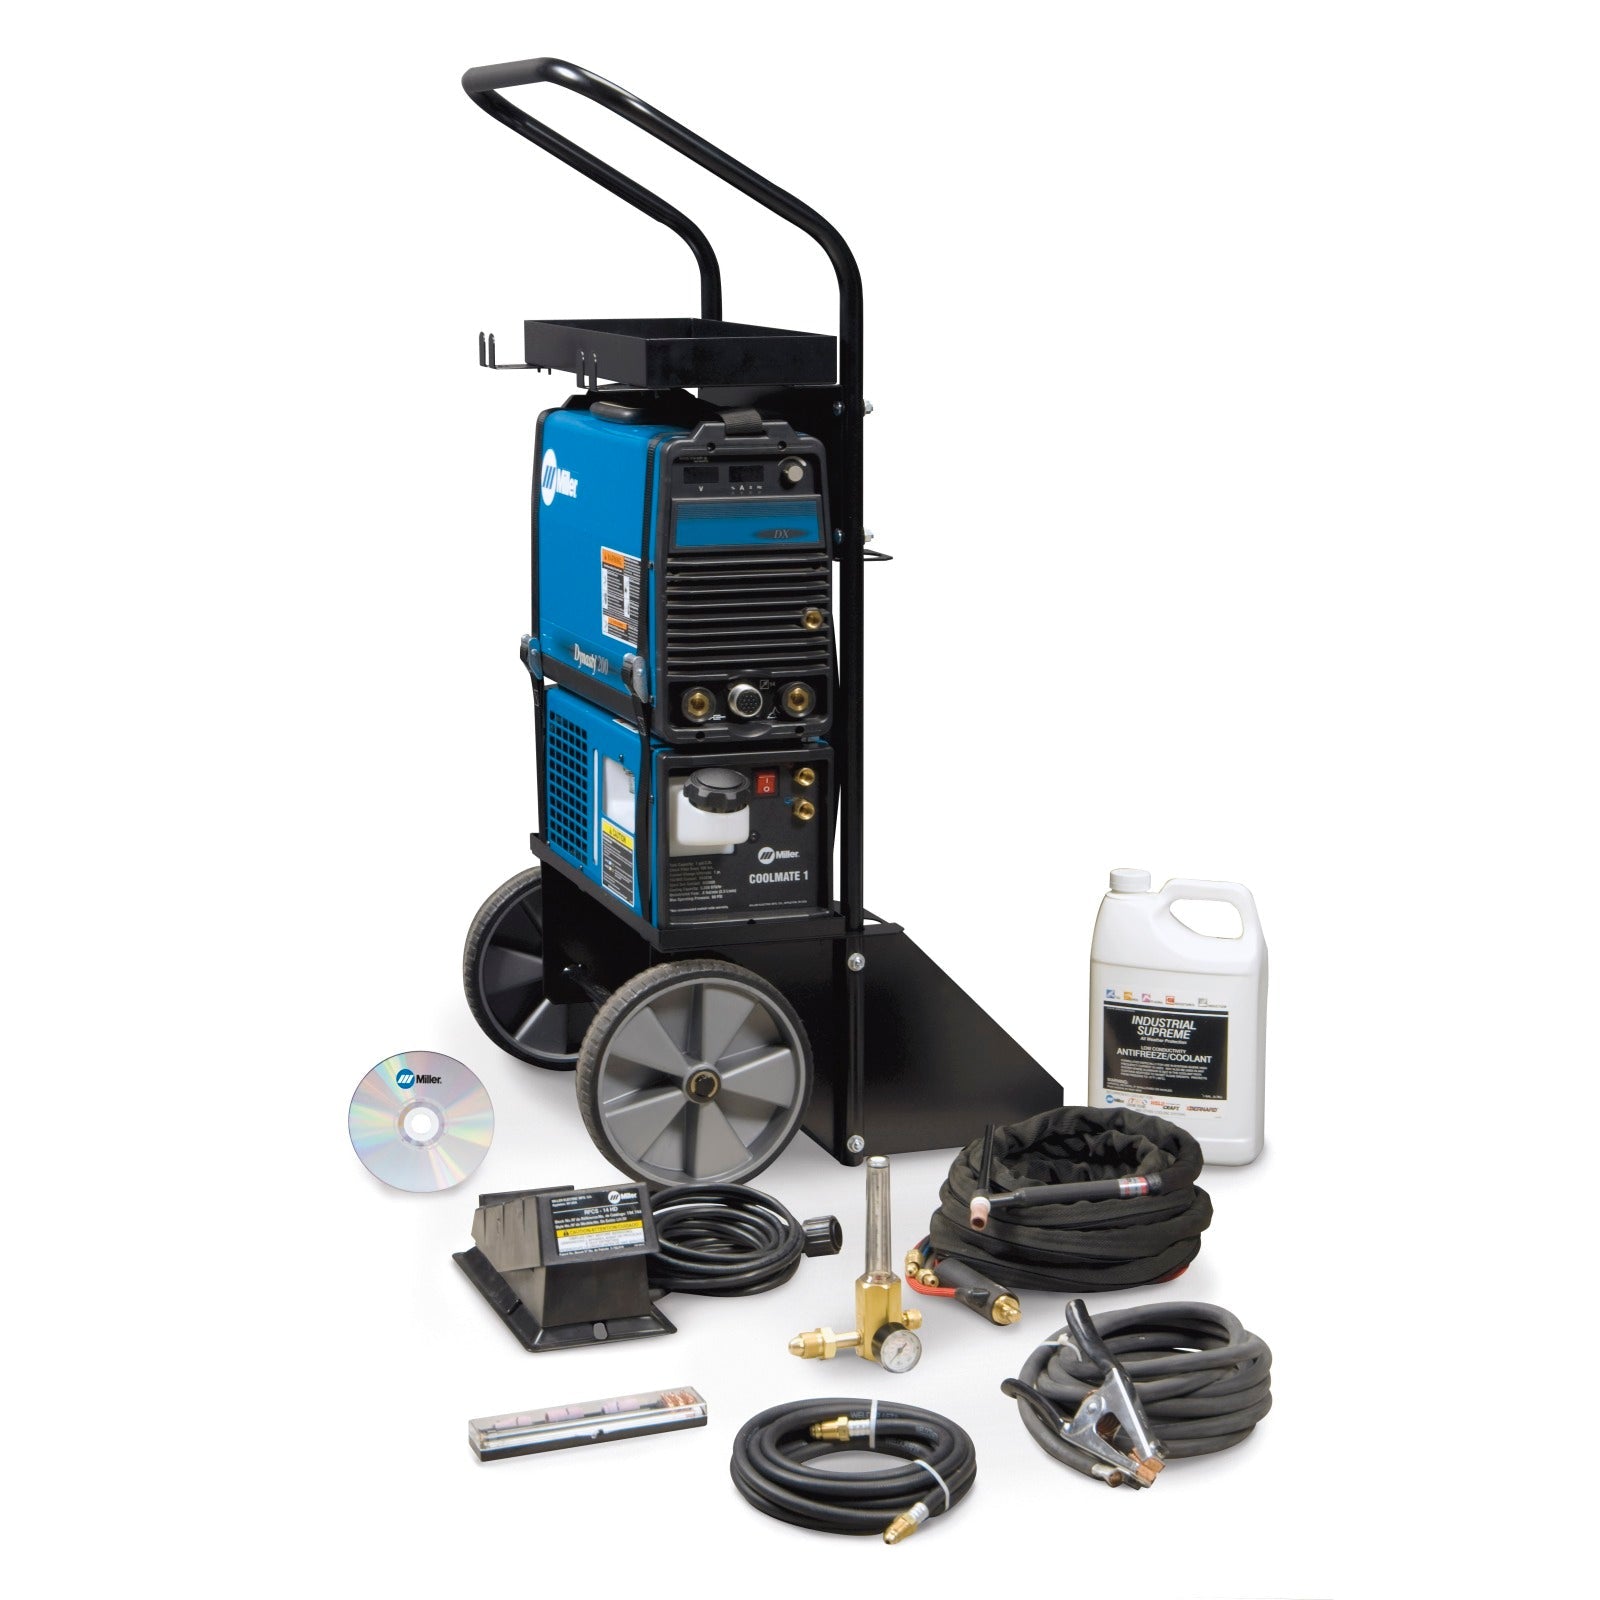 Miller Dynasty 200 DX TIG Welder and Water-Cooled Package with Foot Control (951139)